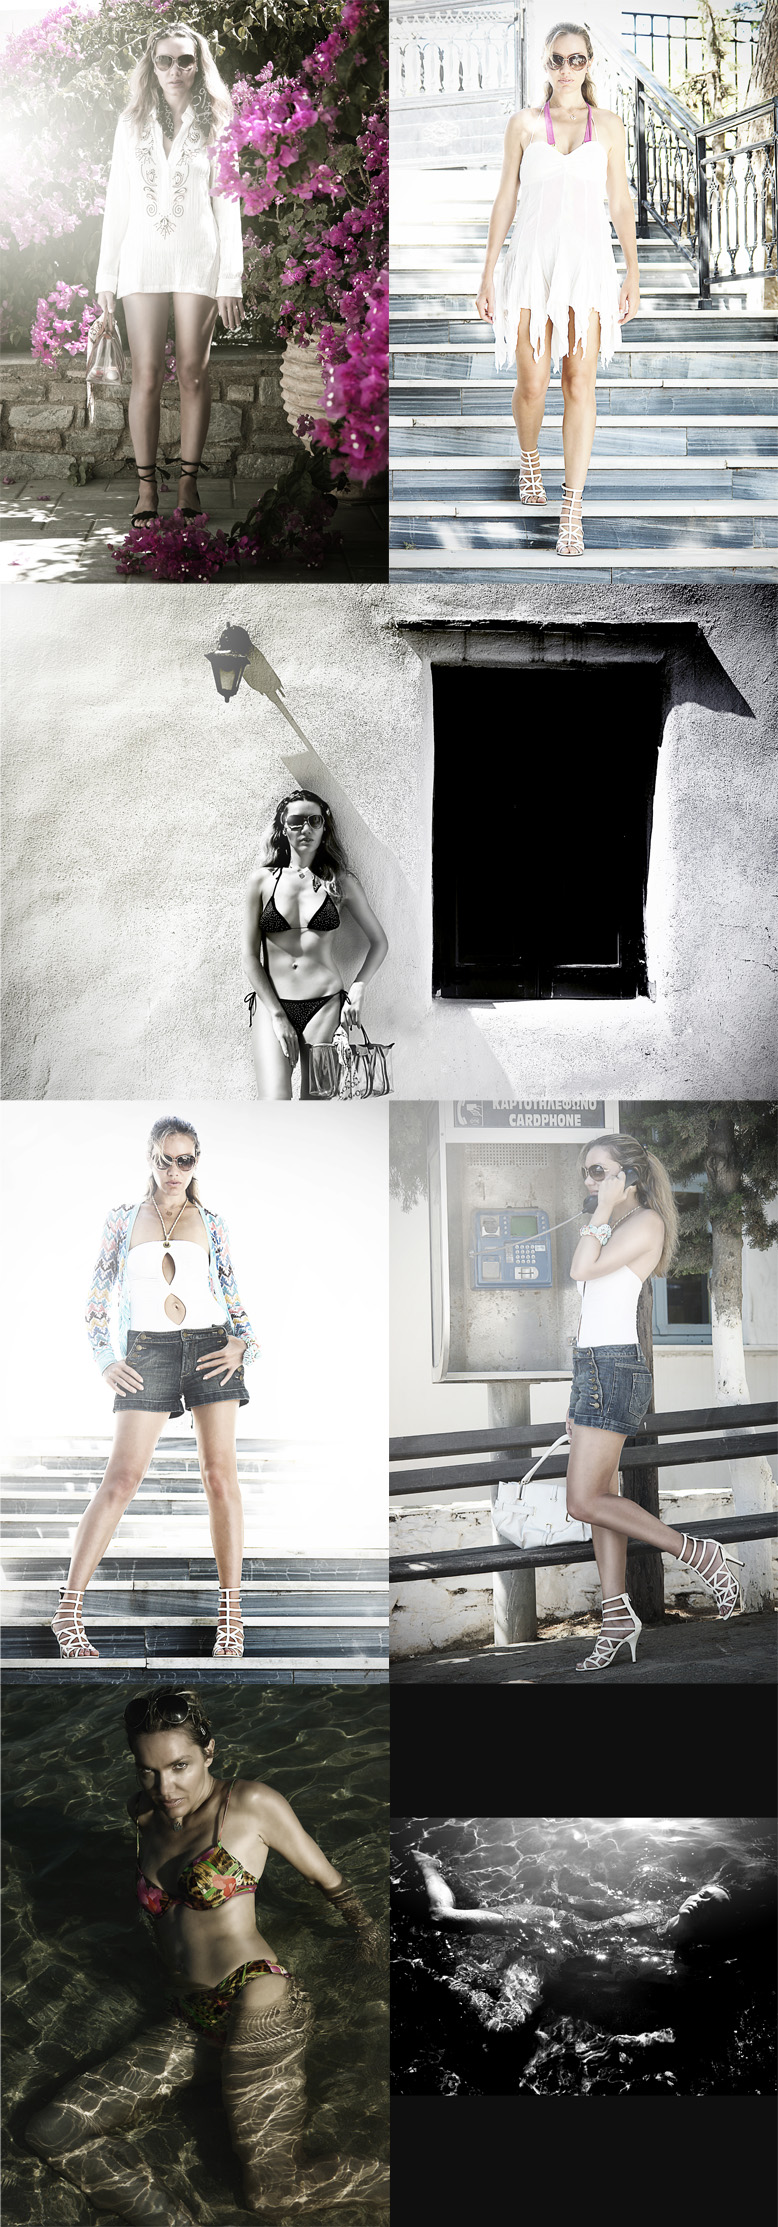 Male and Female model photo shoot of AristoPhoto and Anabelle B in The beautiful greek island of Paros